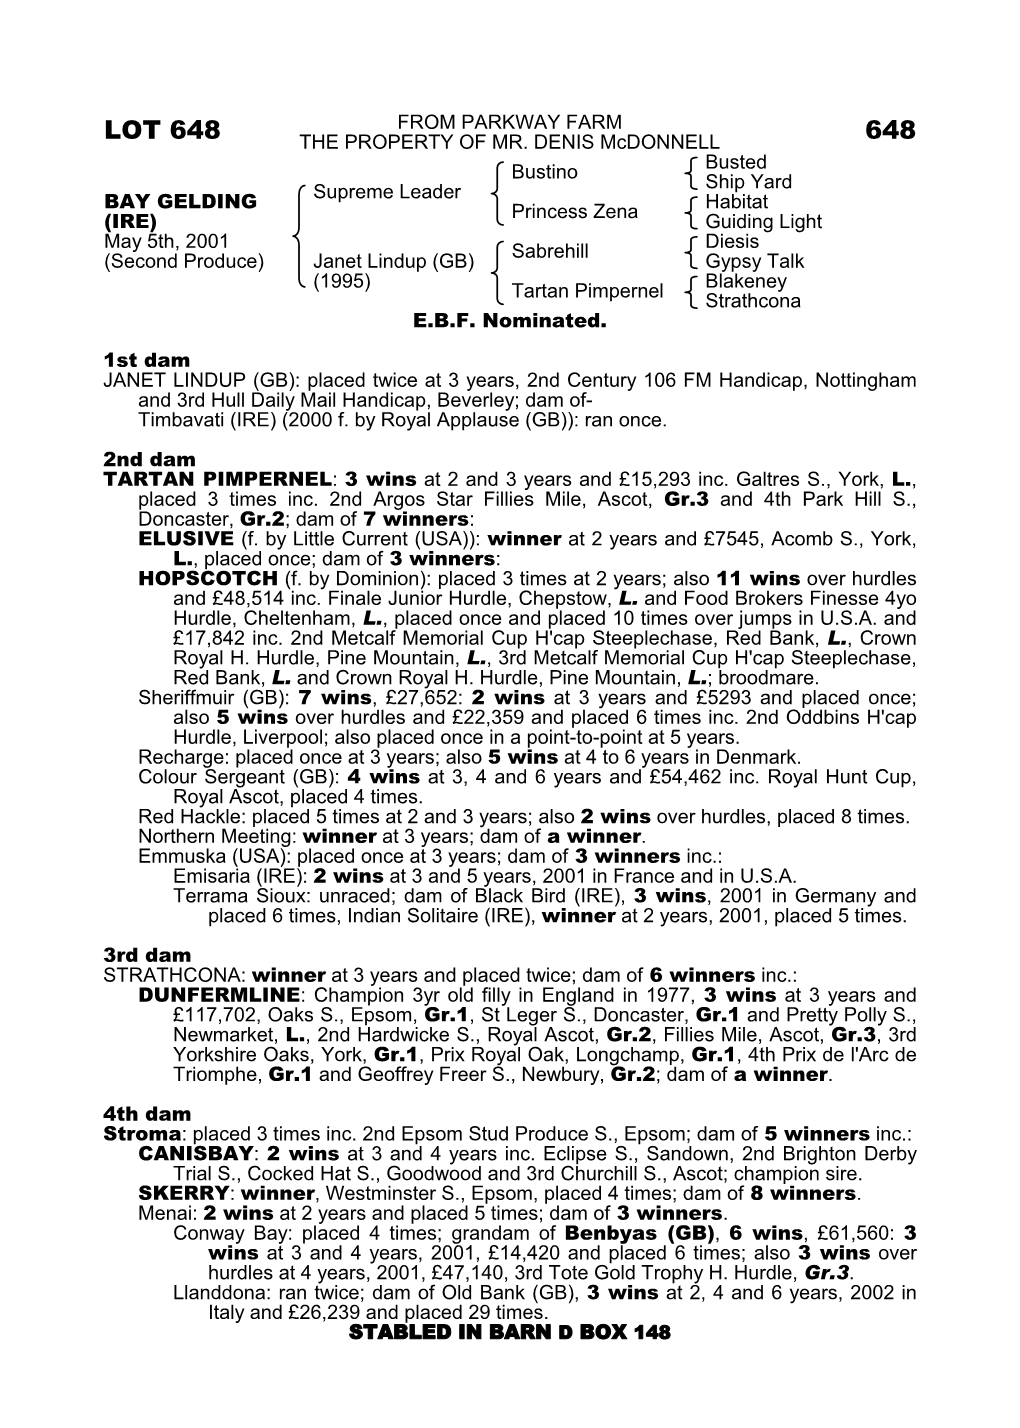 Lot 648 the Property of Mr